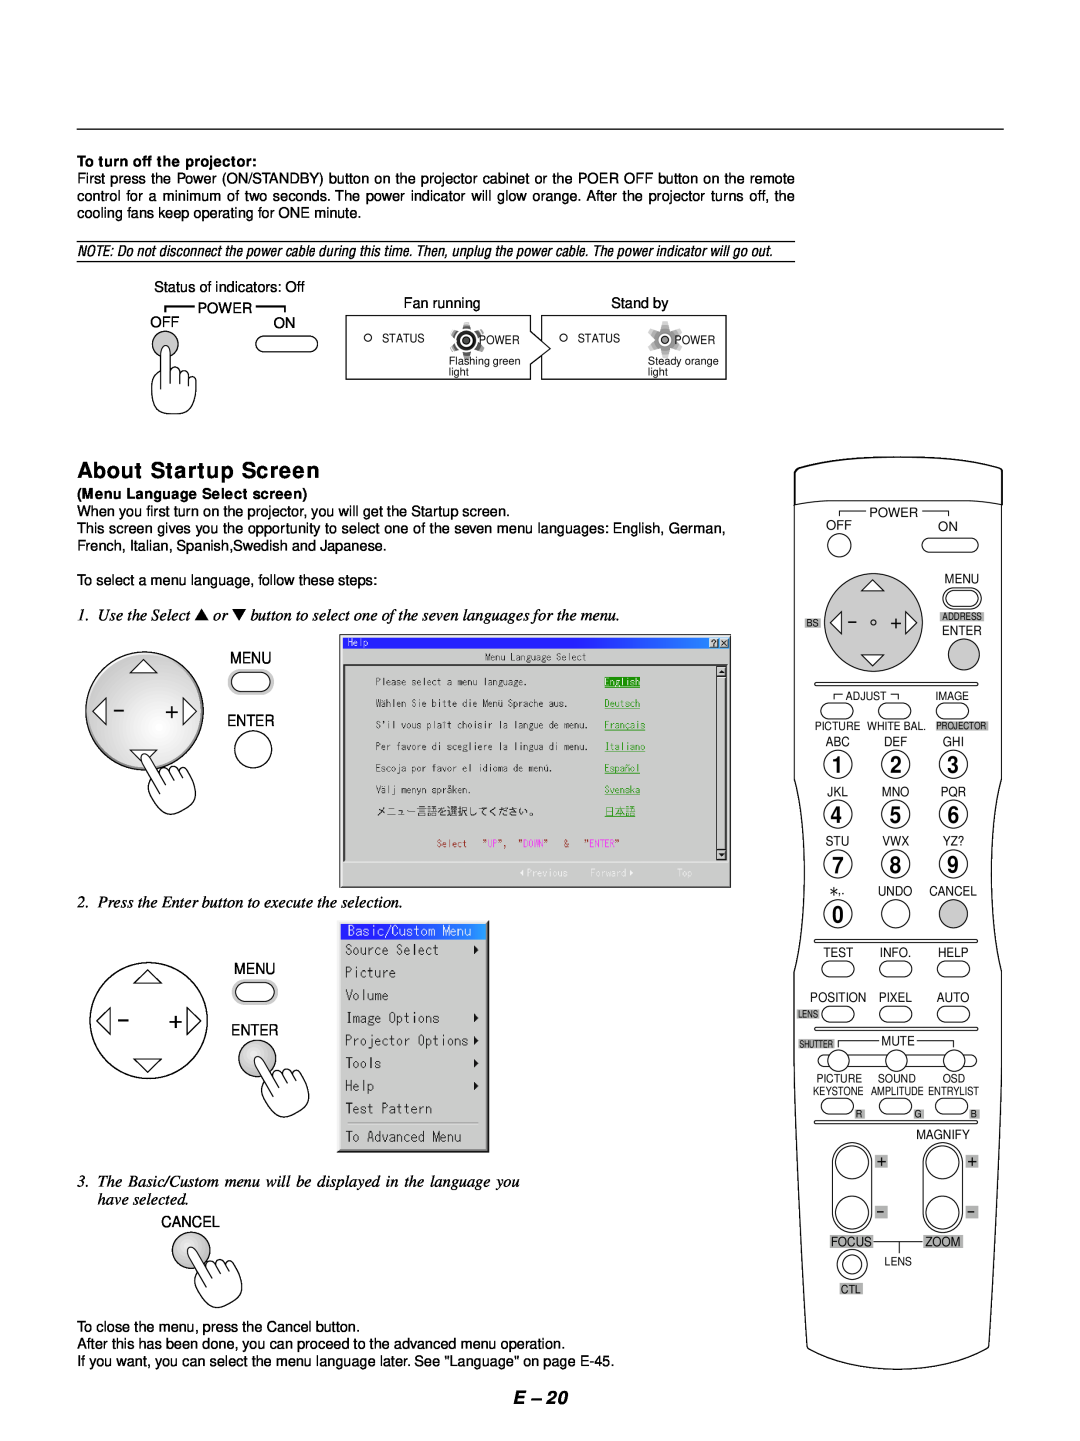 NEC GT1150 user manual About Startup Screen, Press the Enter button to execute the selection 